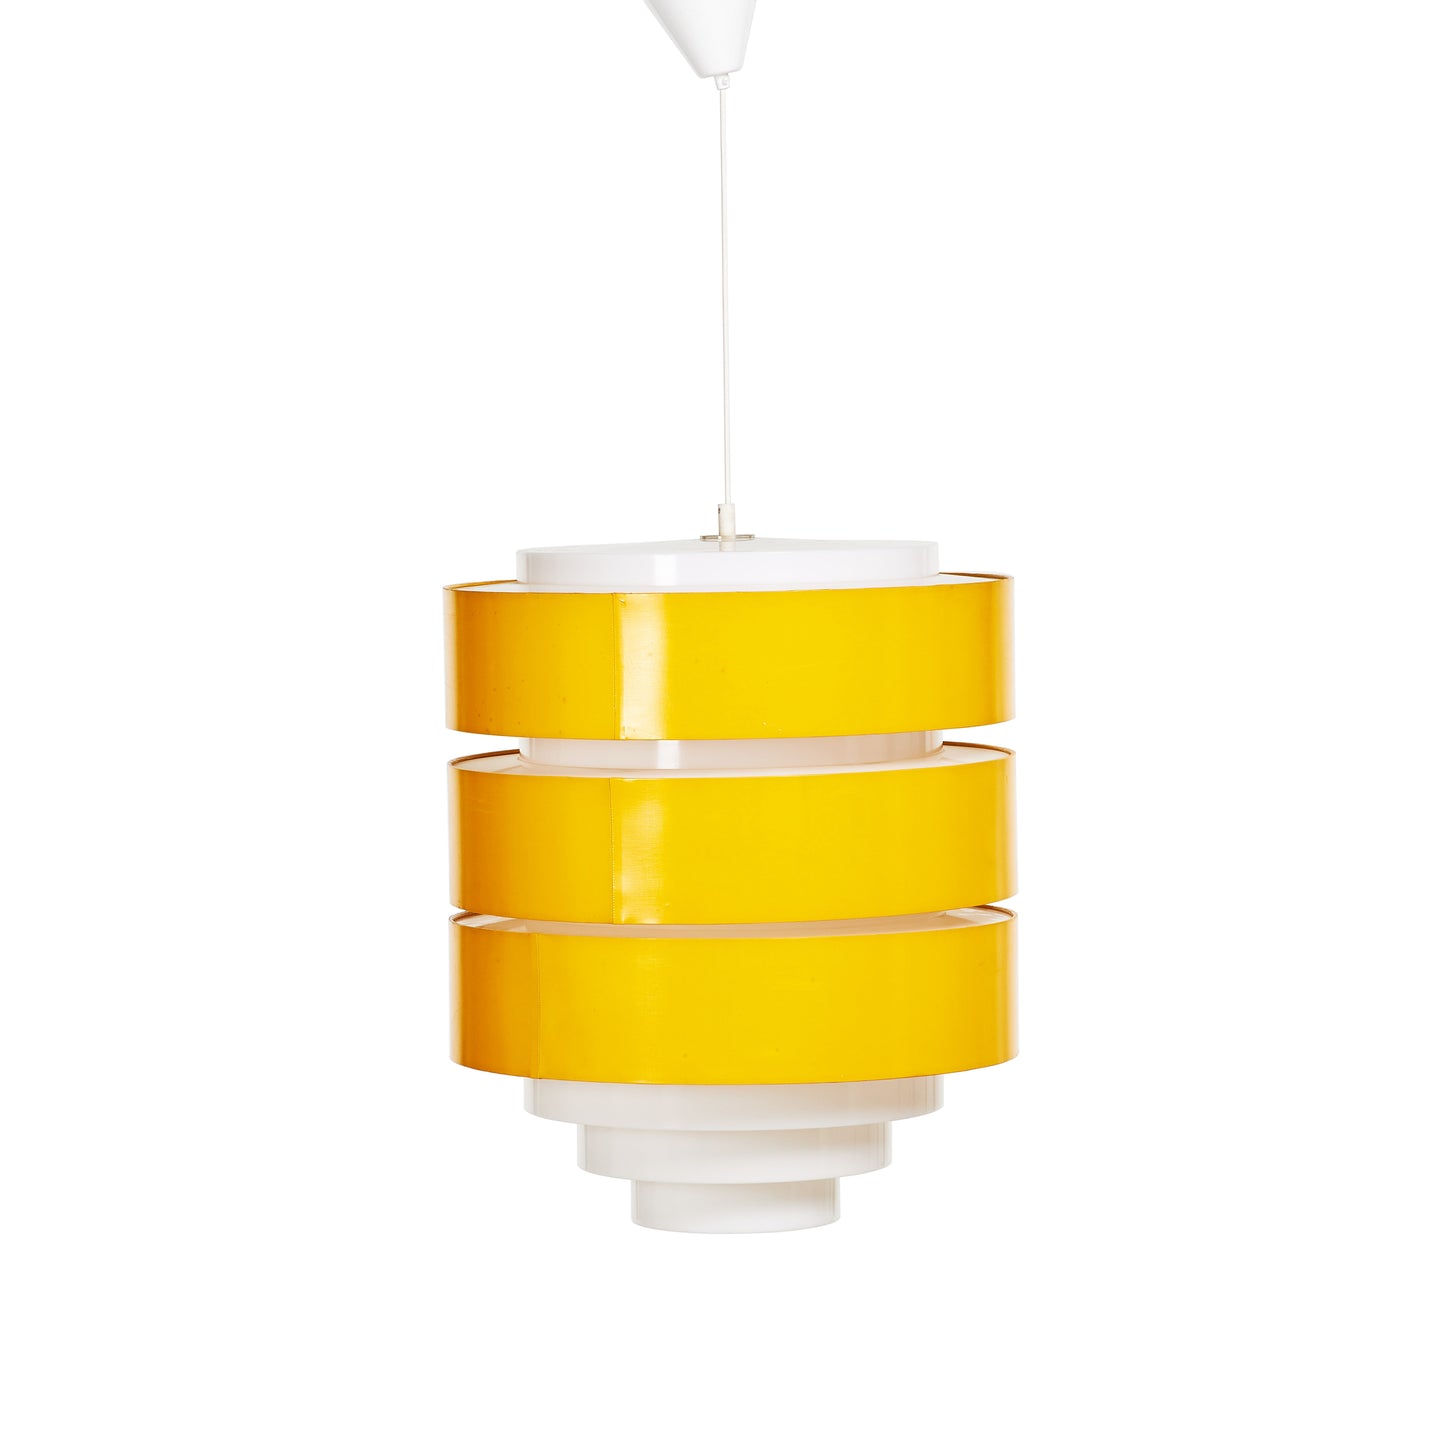 Illuminate Your Space with the Elegance of the Cylindru Ceiling Lamp by Luxus Vittsjö! Note, very large!